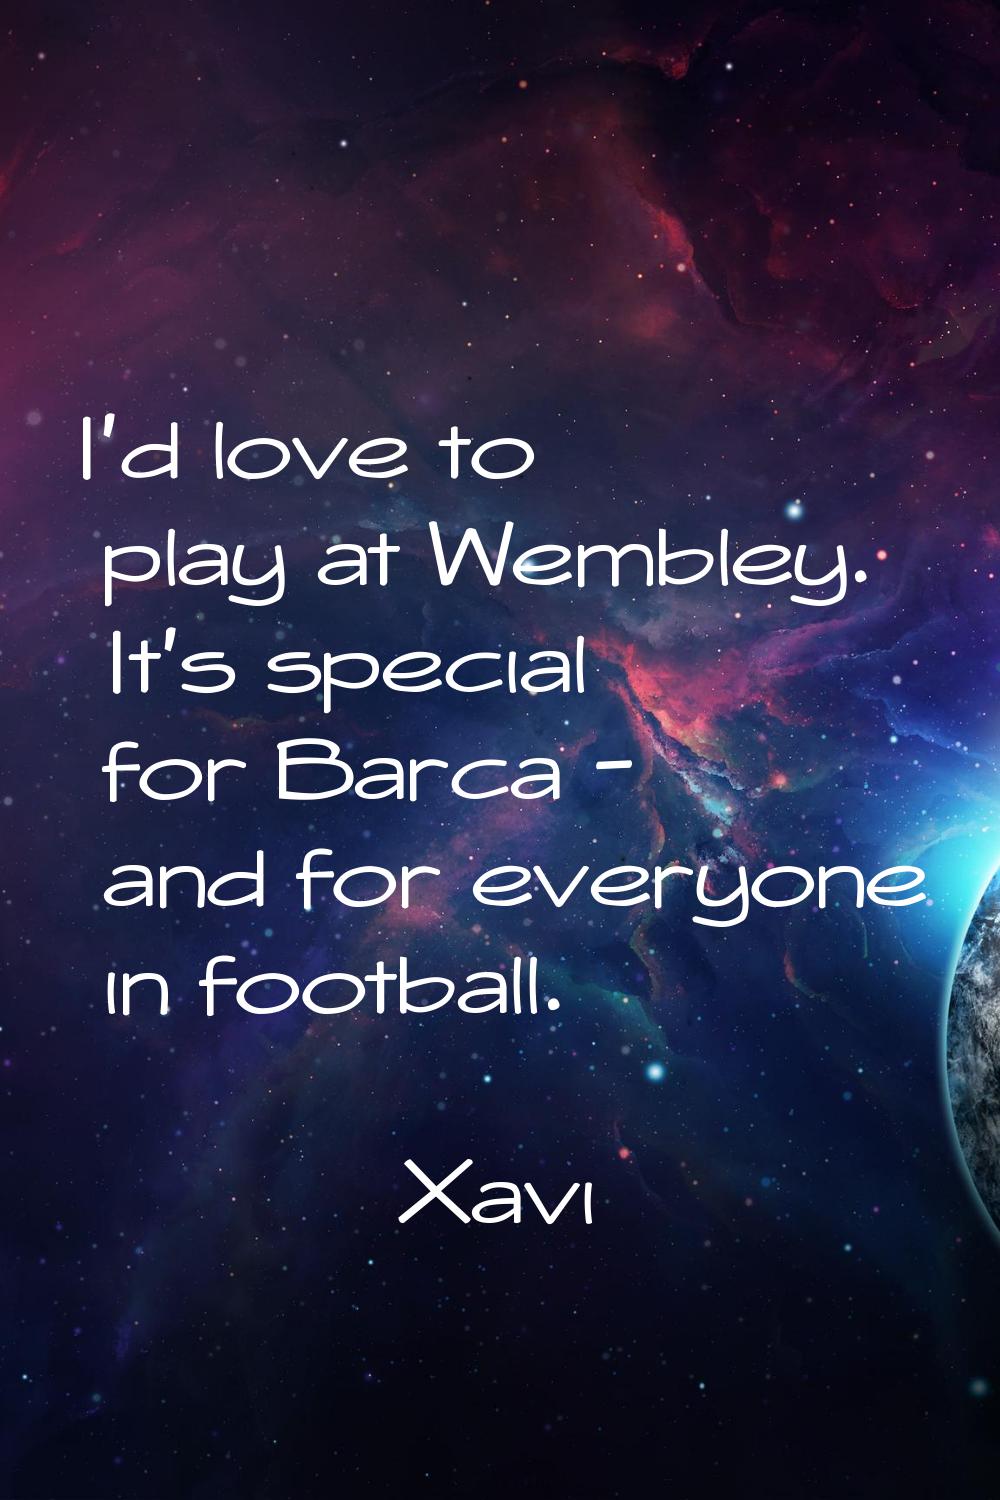 I'd love to play at Wembley. It's special for Barca - and for everyone in football.